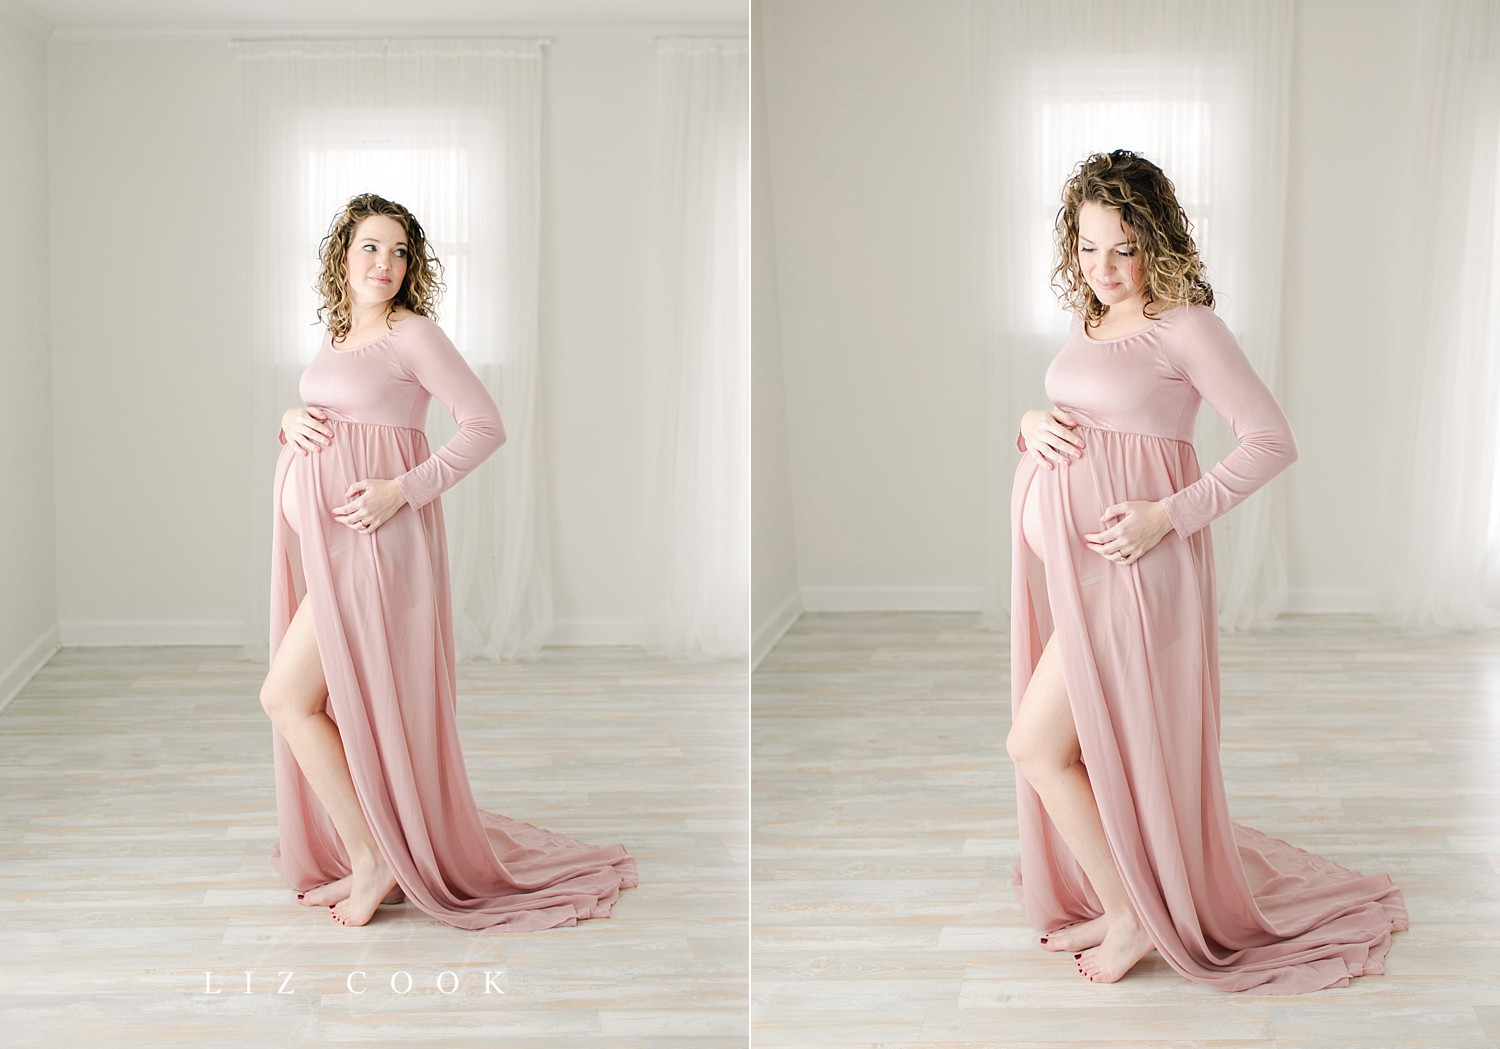 Lynchburg Pregnancy Pictures | Ashley | Baby & Family Photography ...